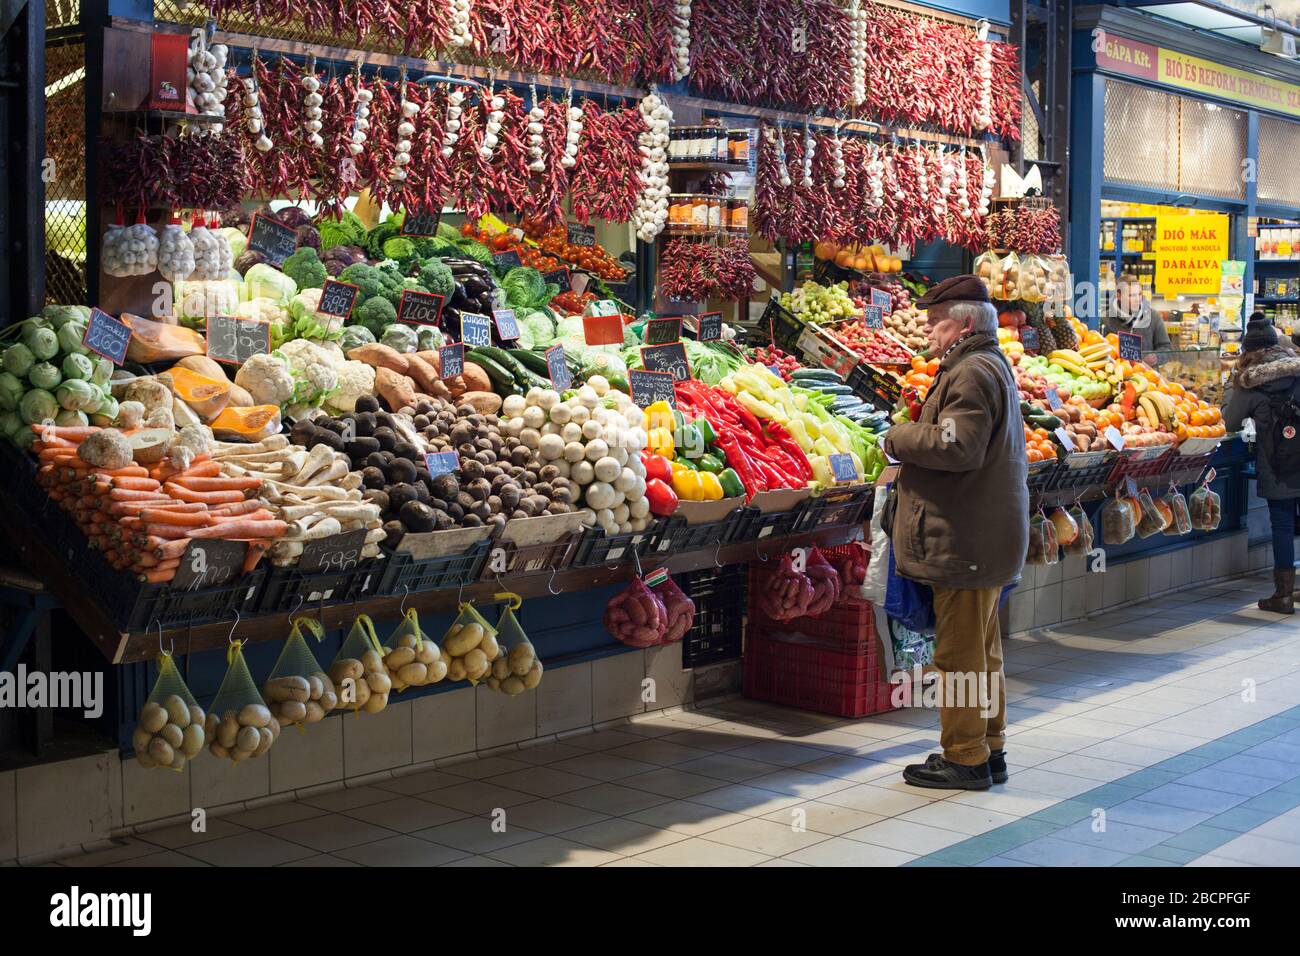 A man looks at produce on a fresh vegetables market stall in The Central Market Hall, Budapest, Hungary in winter Stock Photo